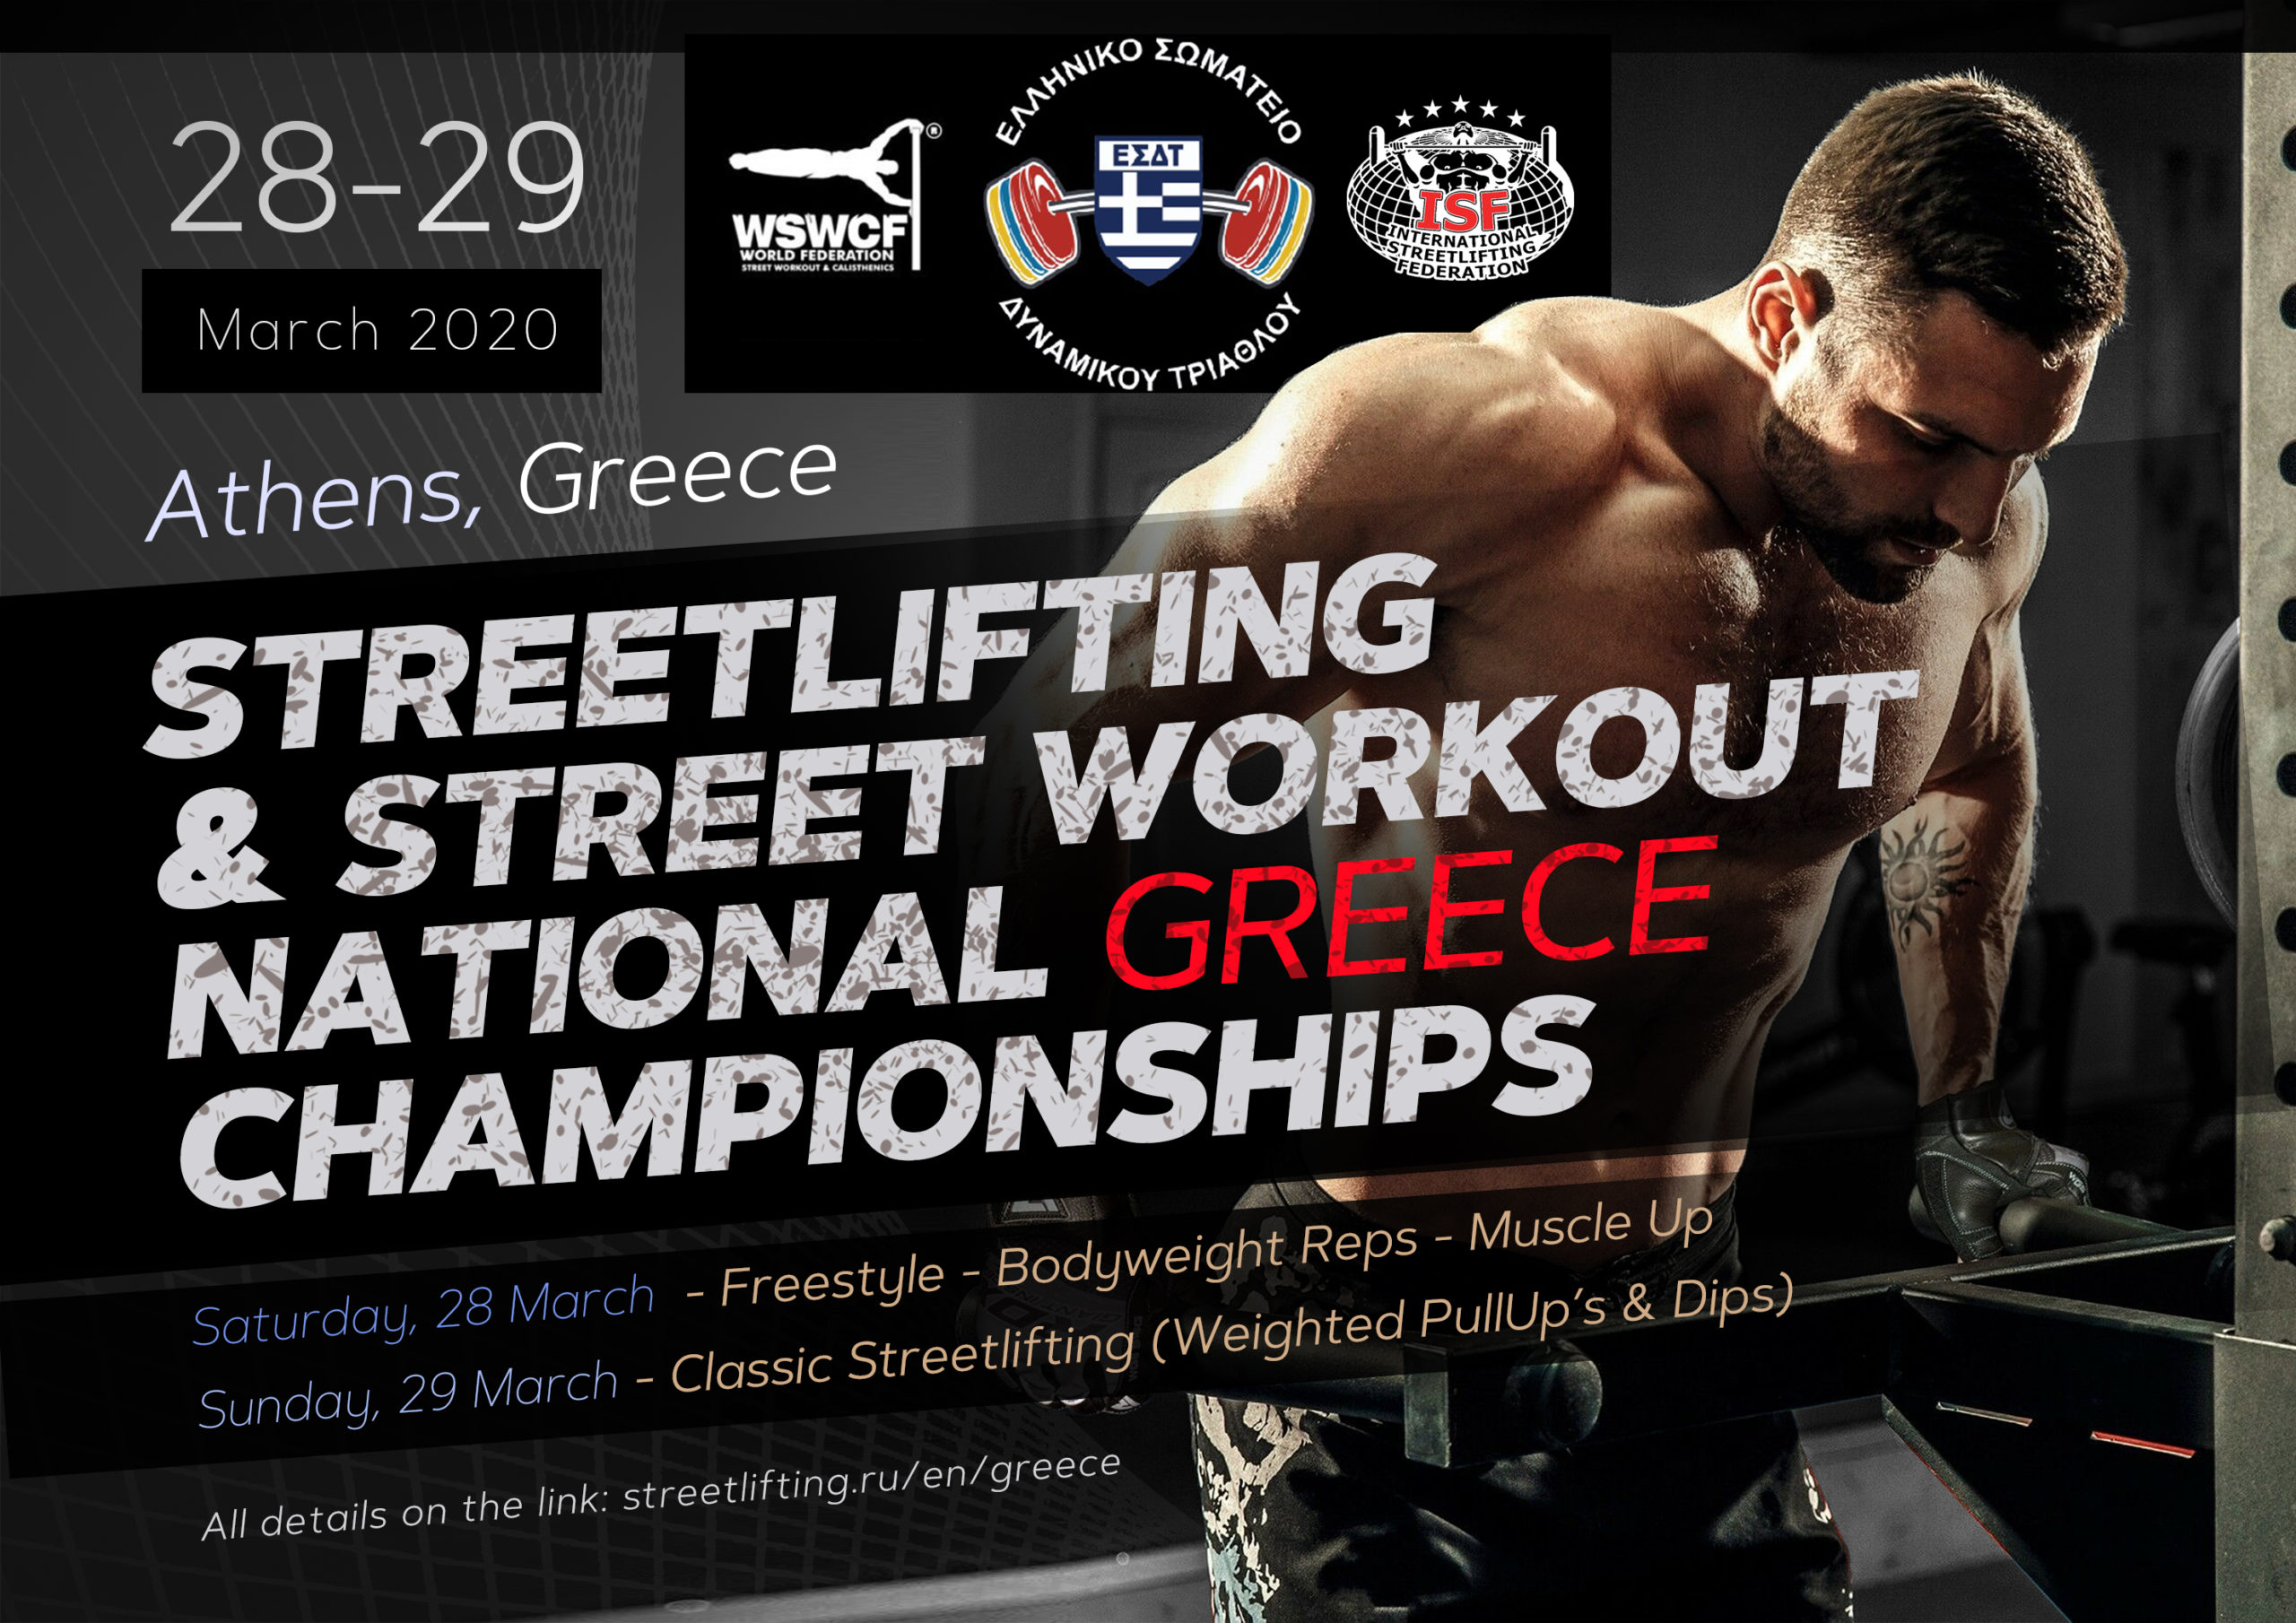 28-29 March 2020 – Streetlifting & Street Workout National Championship, Athens-Greece